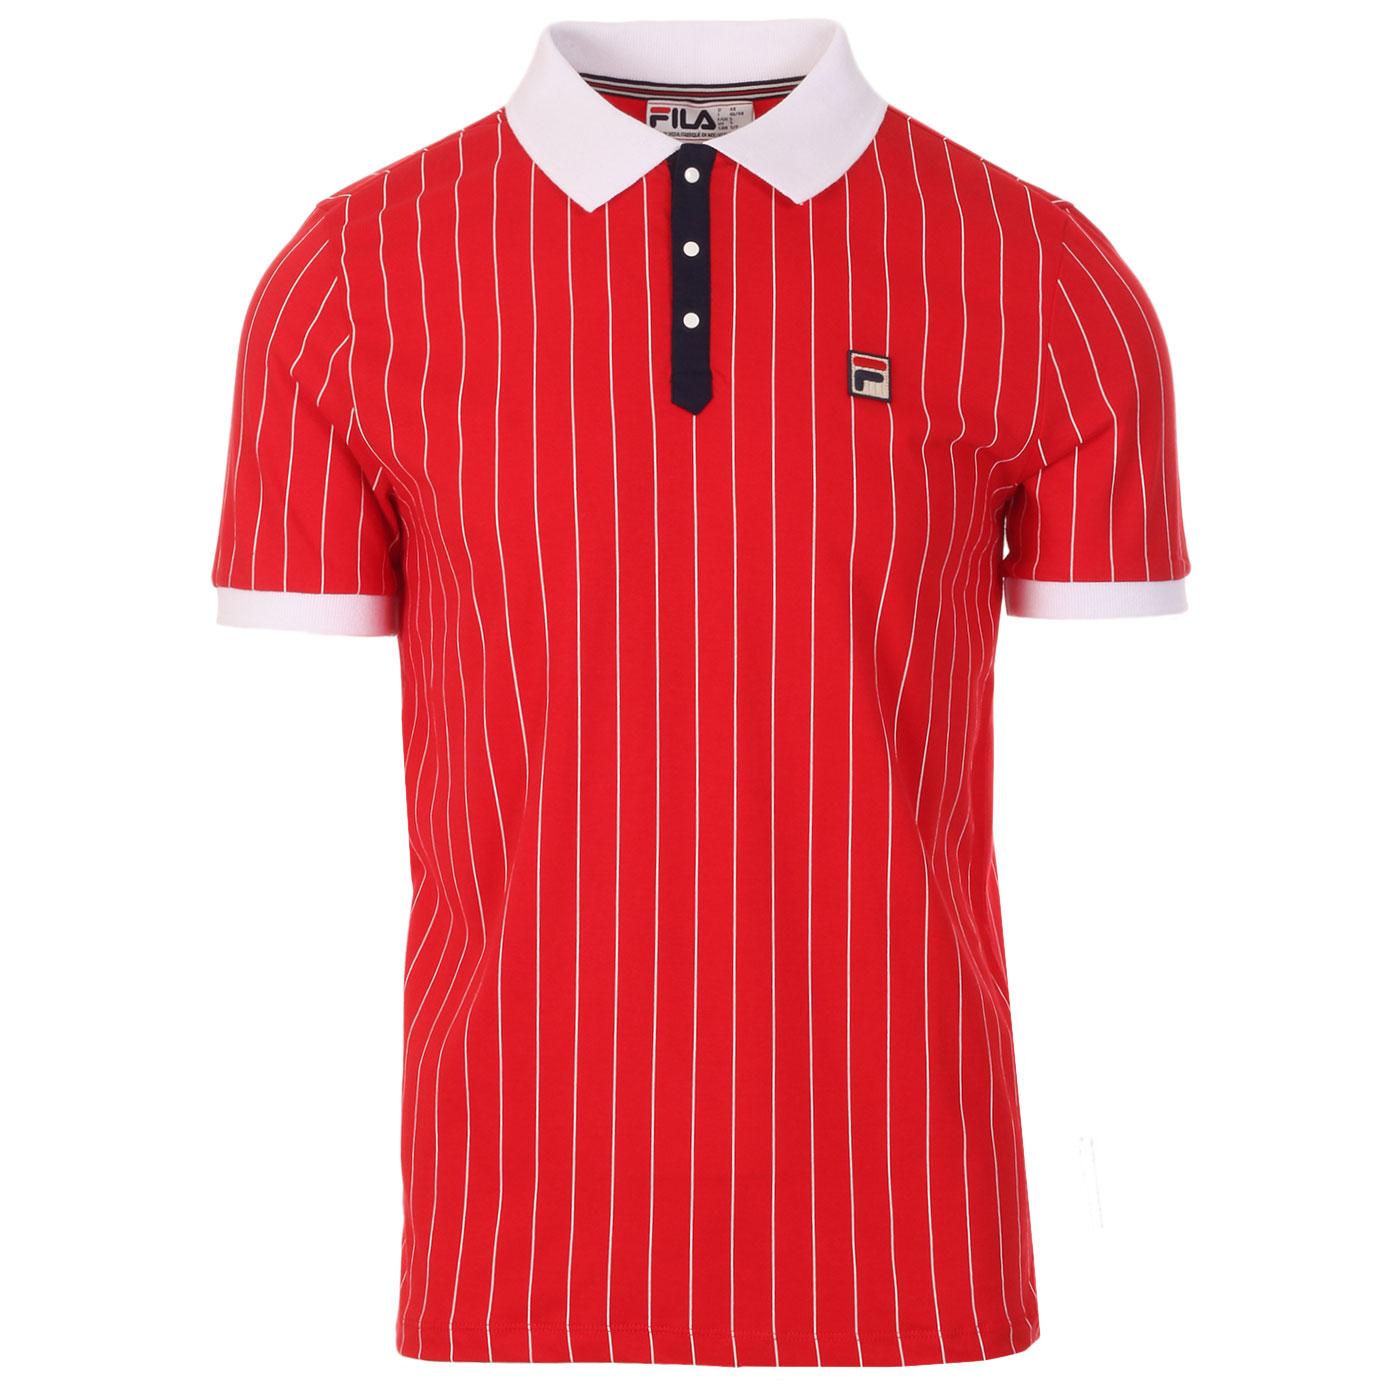 FILA VINTAGE BB1 Retro Borg Tennis Polo in Chinese Red